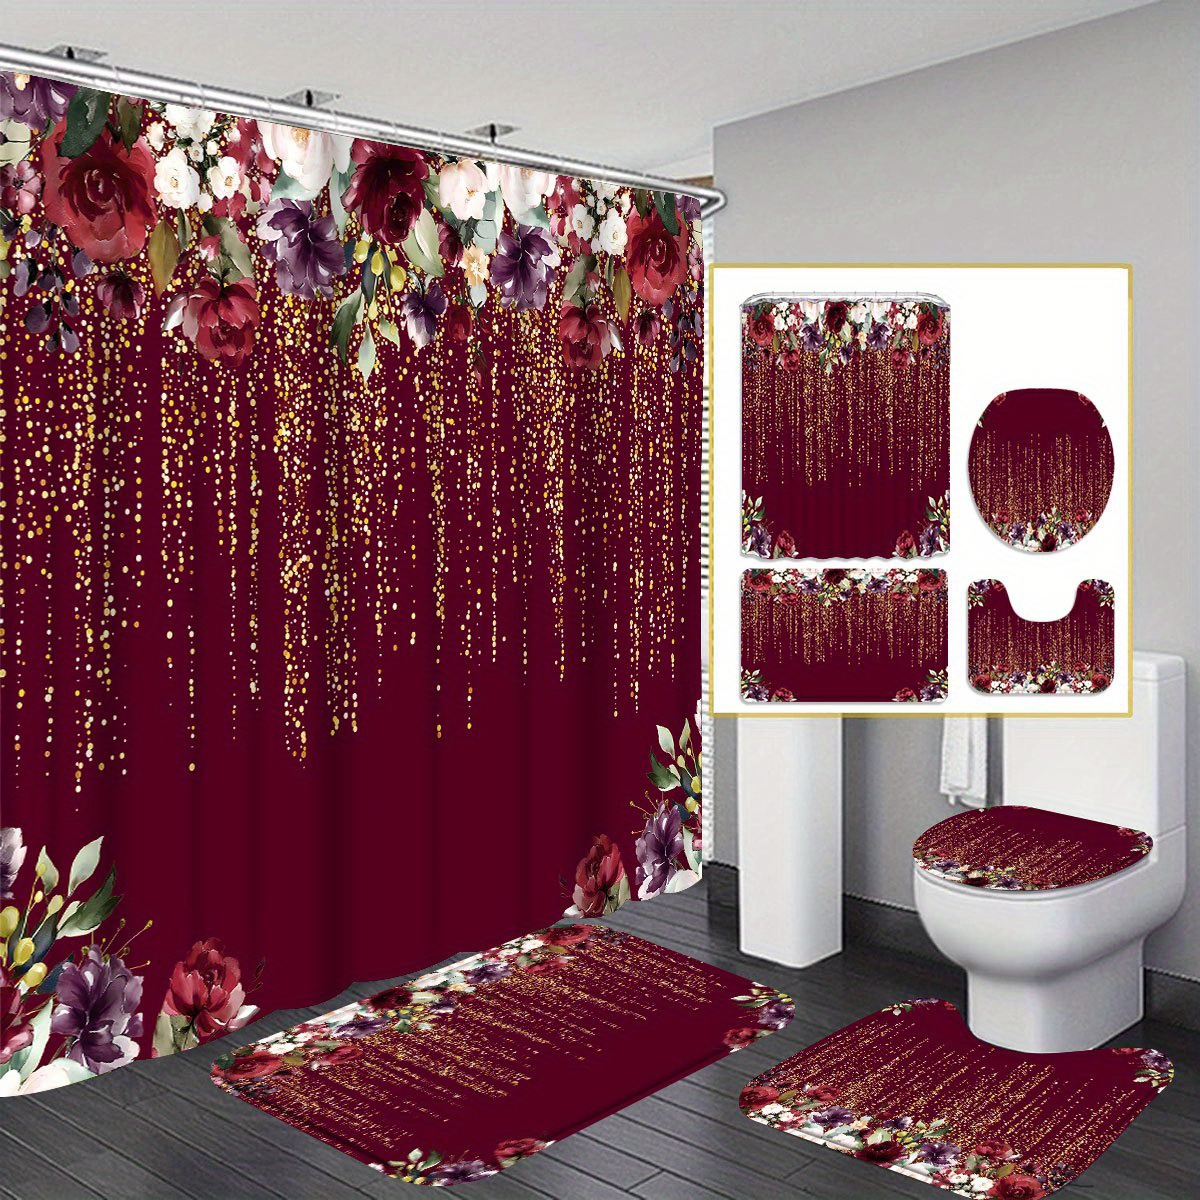 

1pcs/4pcs Festive Red Flowers Shower Curtain Gift Modern Home Bathroom Decoration Curtain And Toilet Floor Mat 3-piece Set With 12 Shower Curtain Hooks